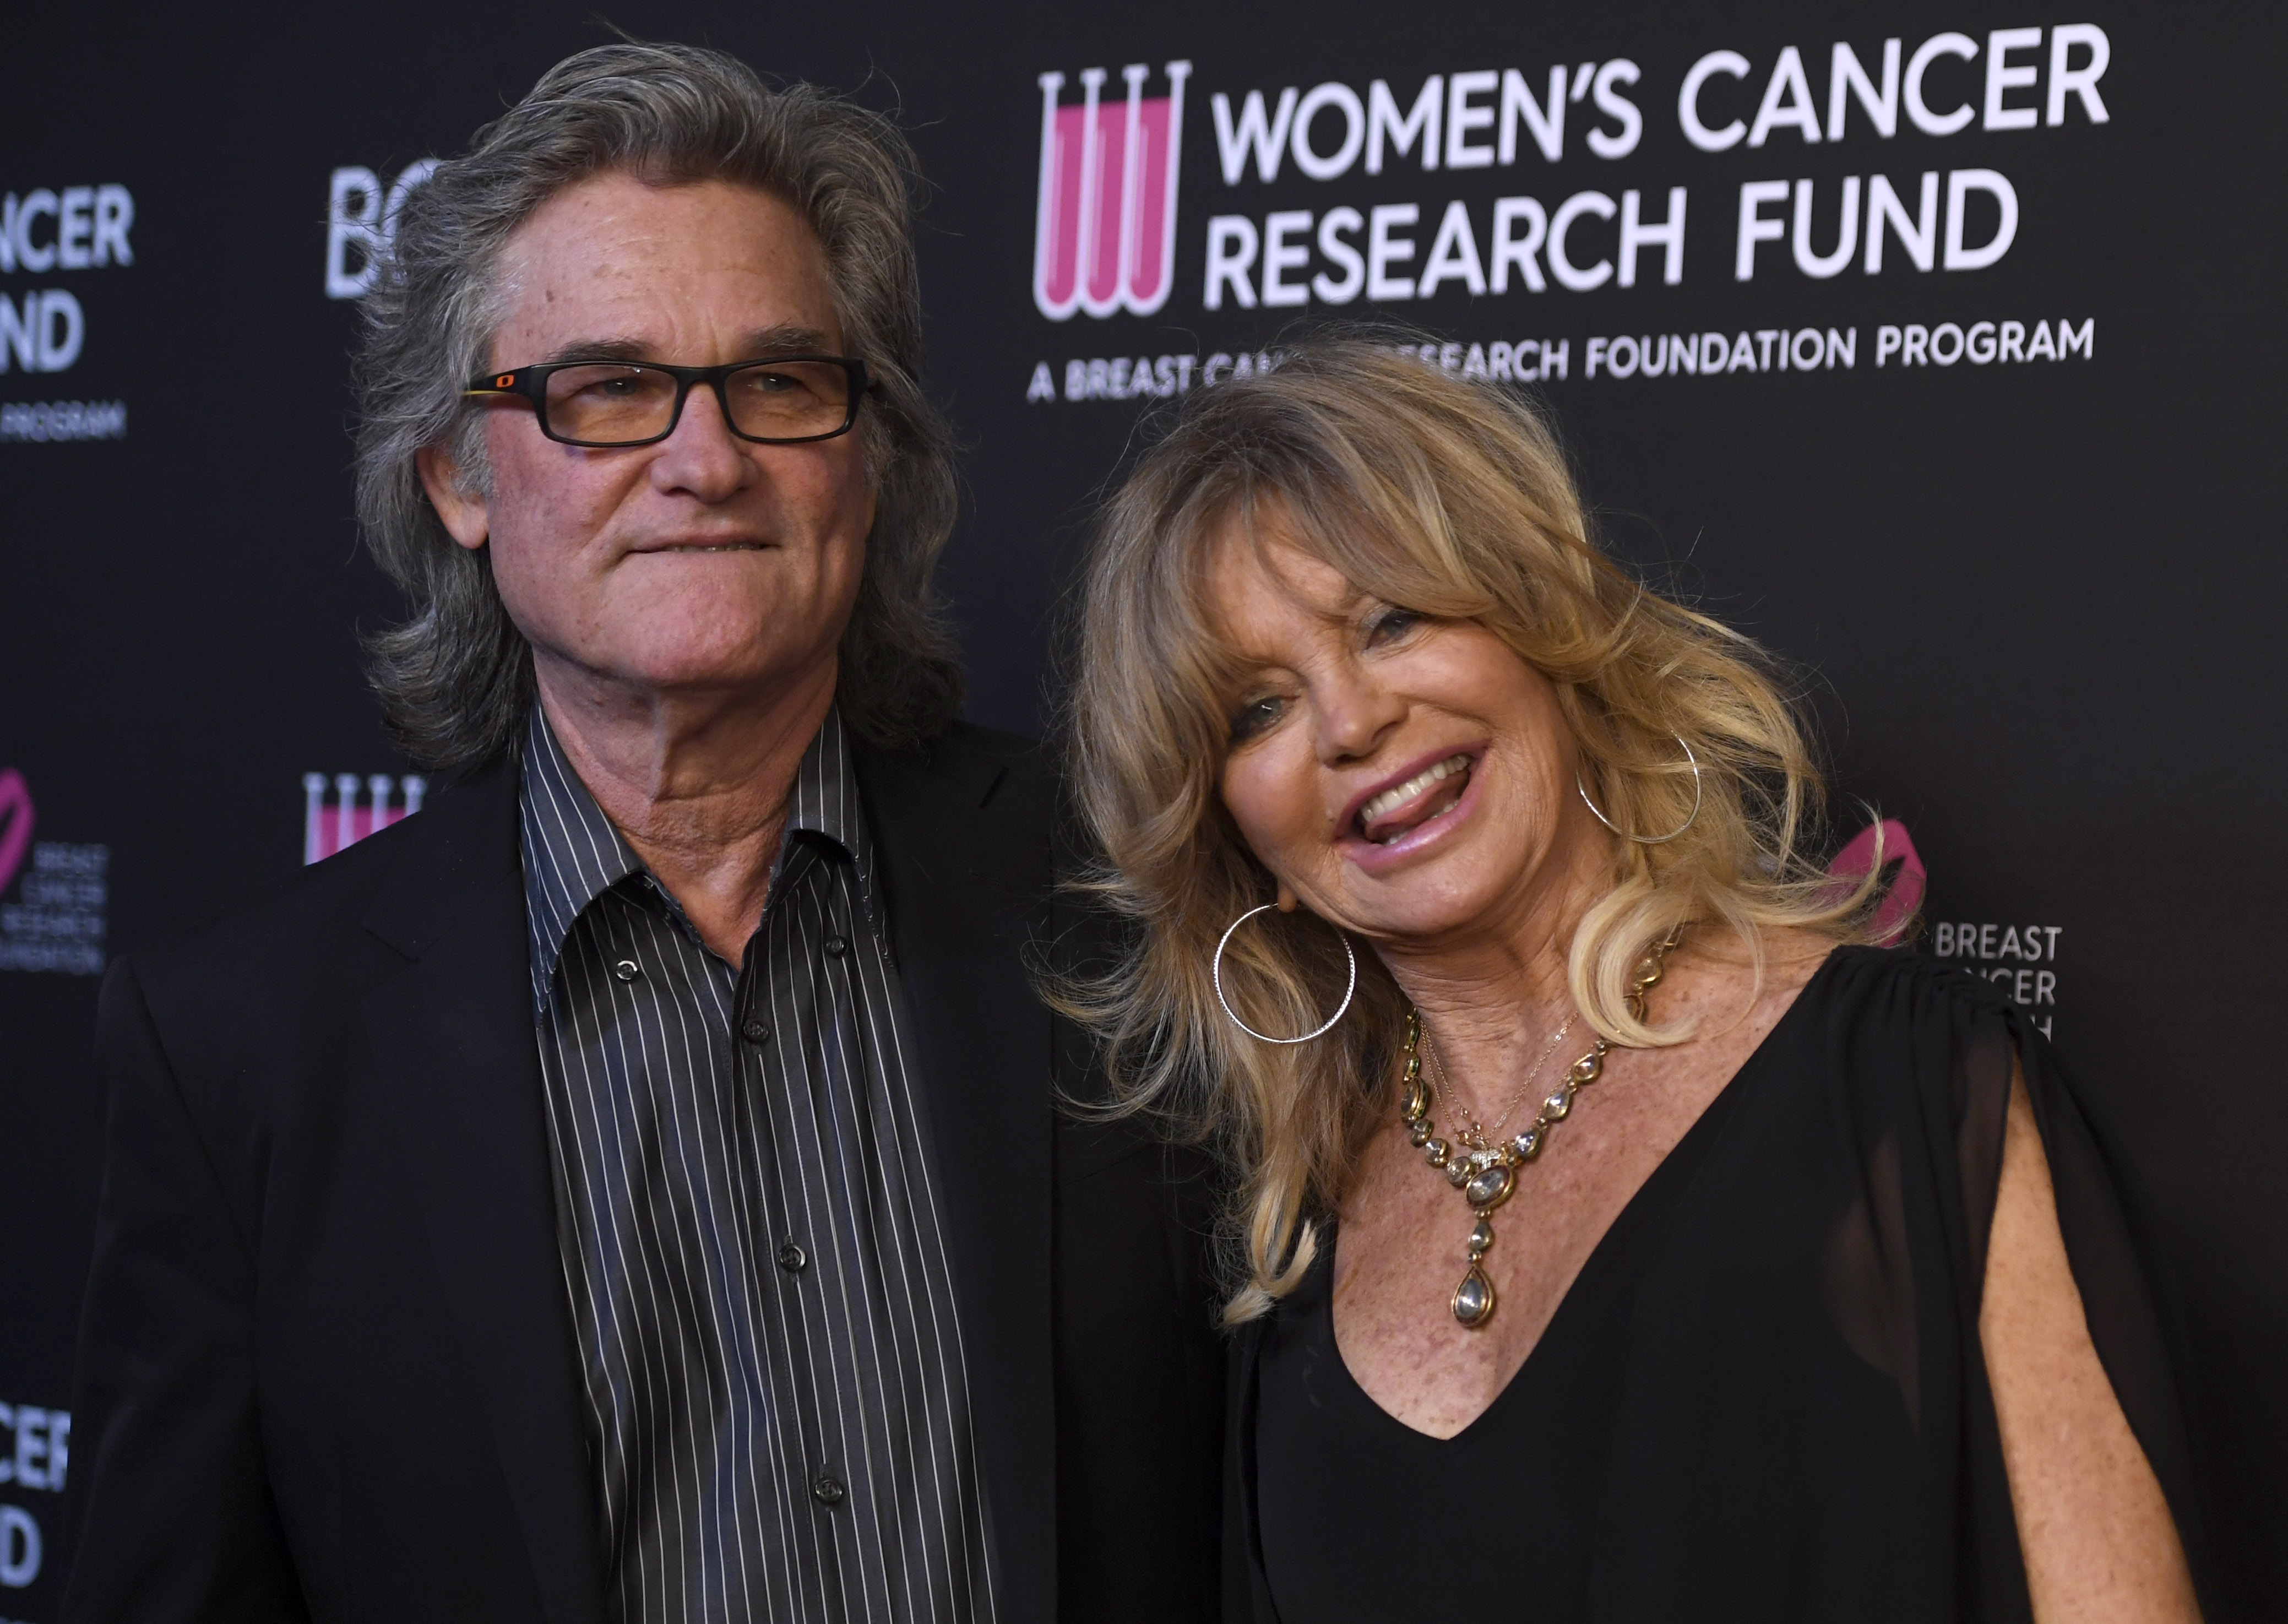 Kurt Russell and Goldie Hawn attend The Women's Cancer Research Fund's Benefit Gala in Beverly Hills on February 28, 2019 | Source: Getty Images